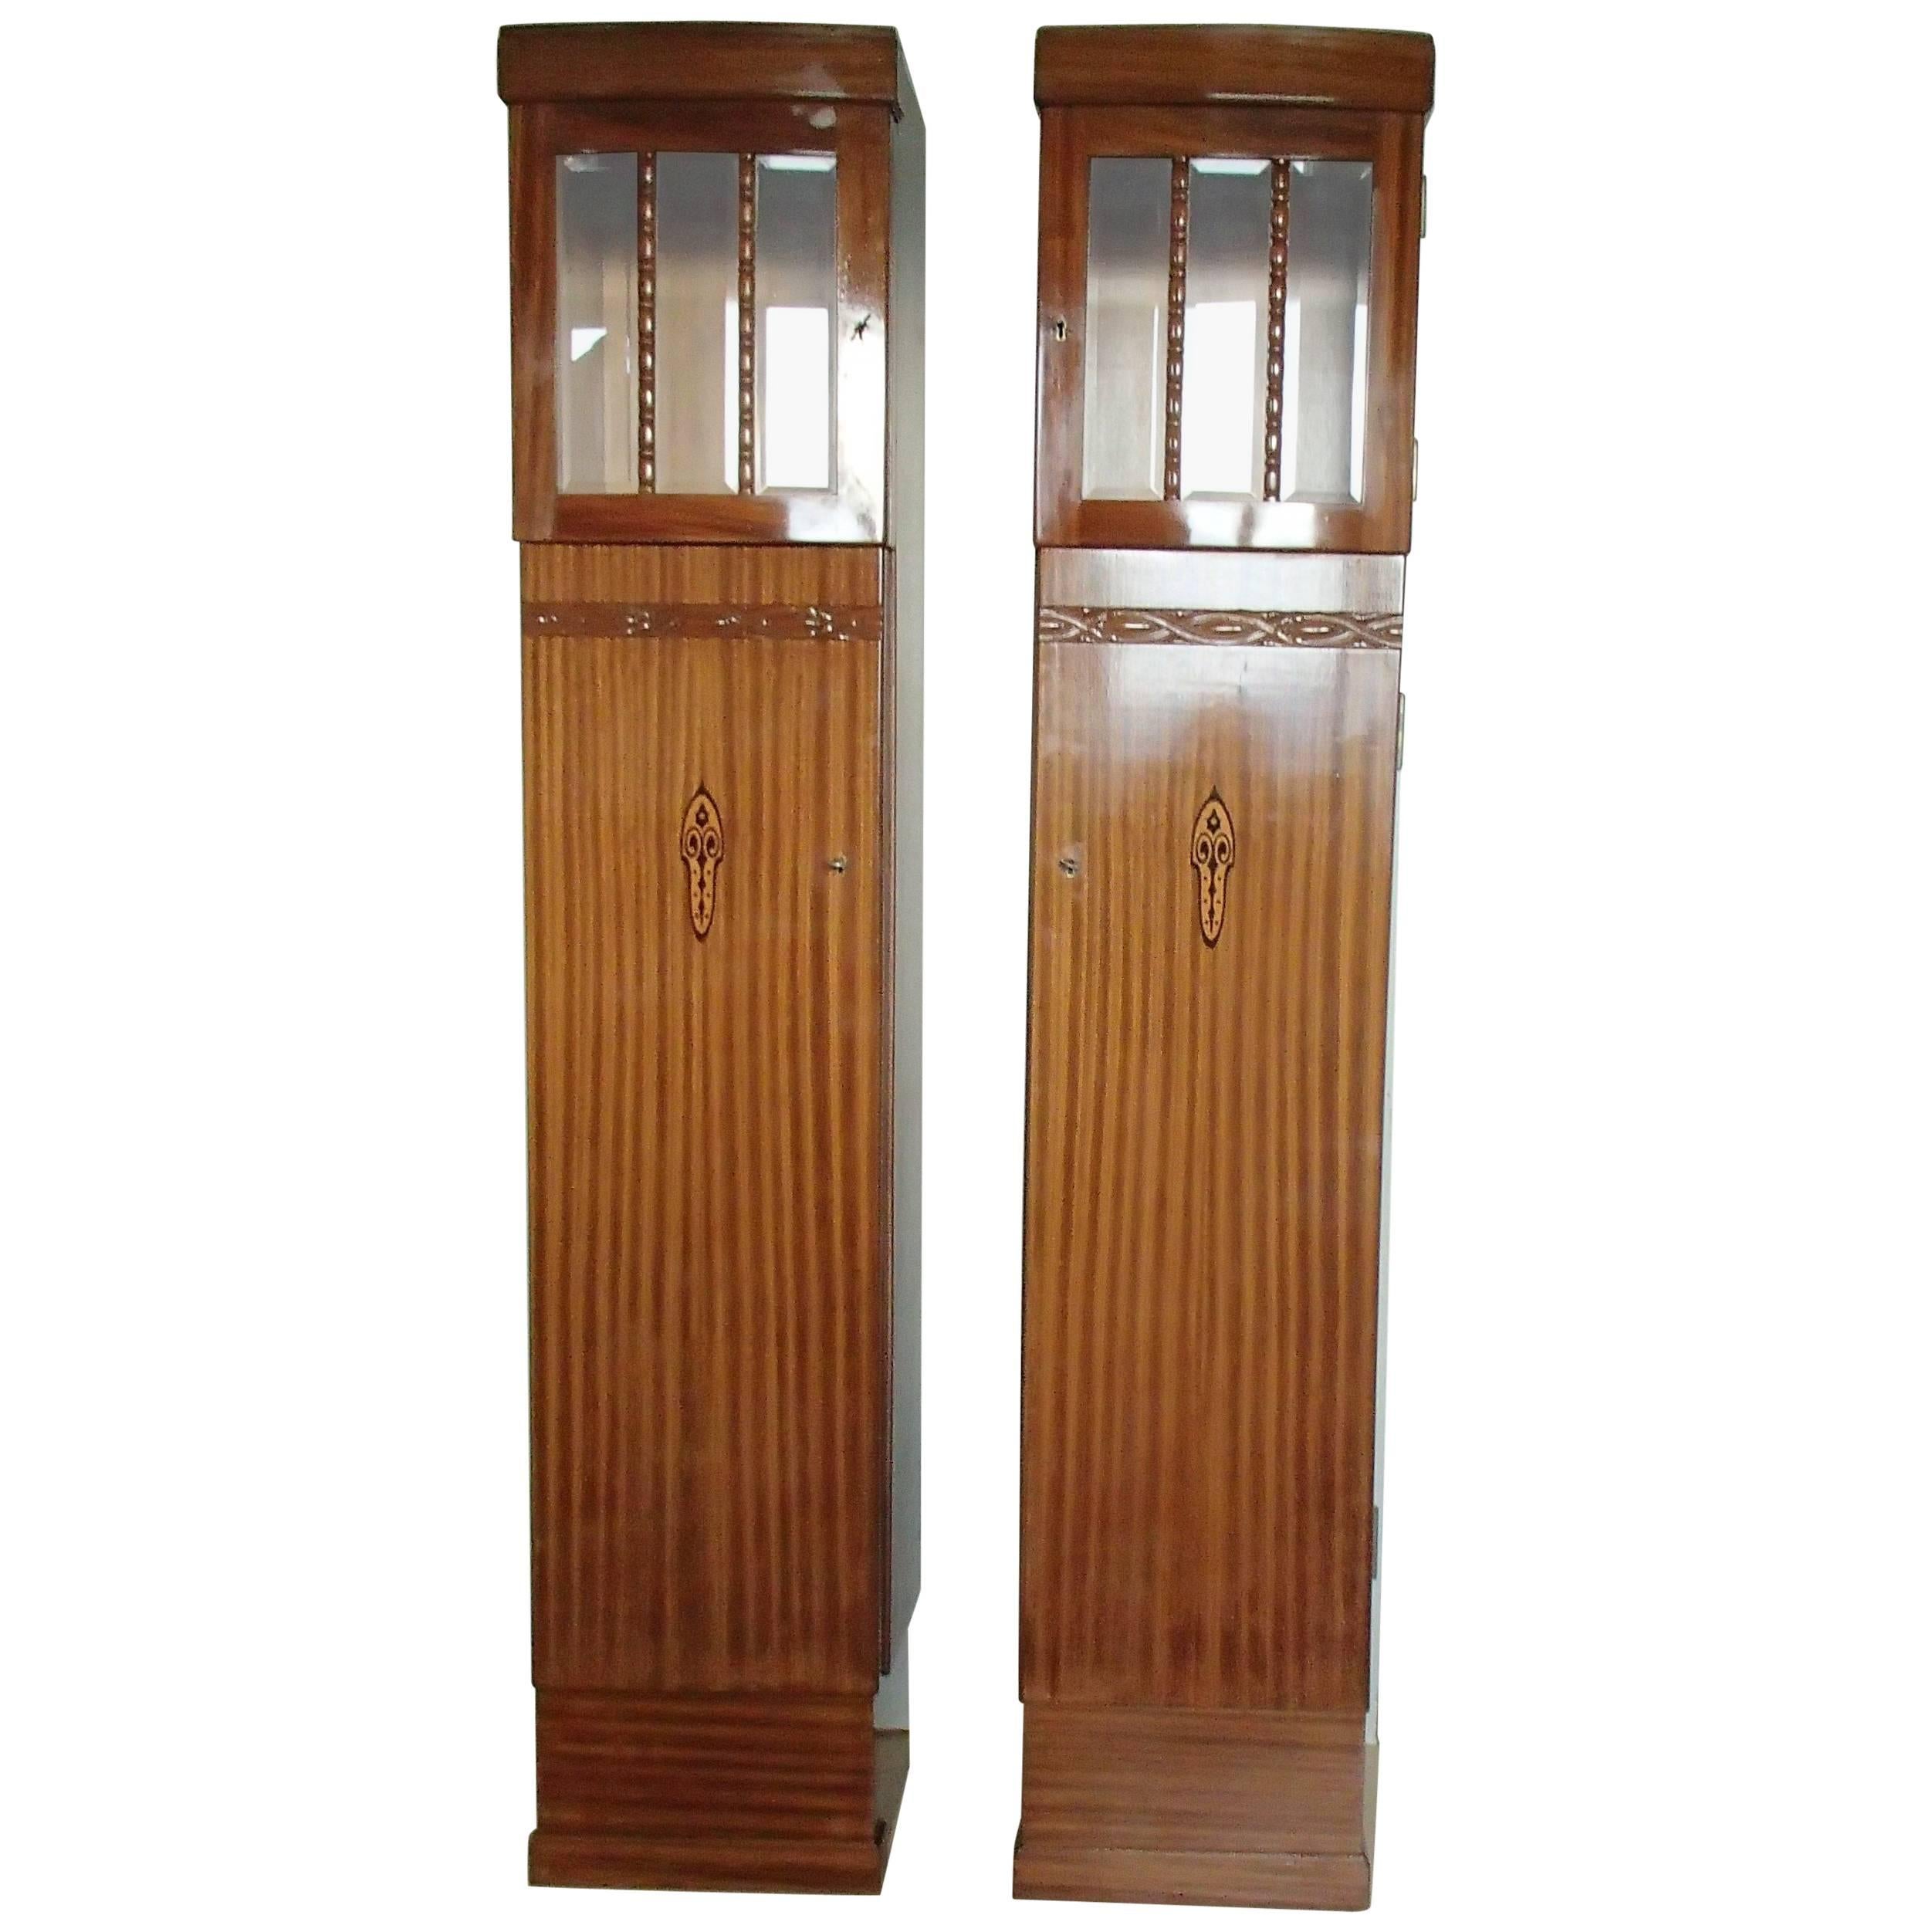 Pair of Art Nouveau Small Armoires or Cabinets Mahogany and Glass with Inlay